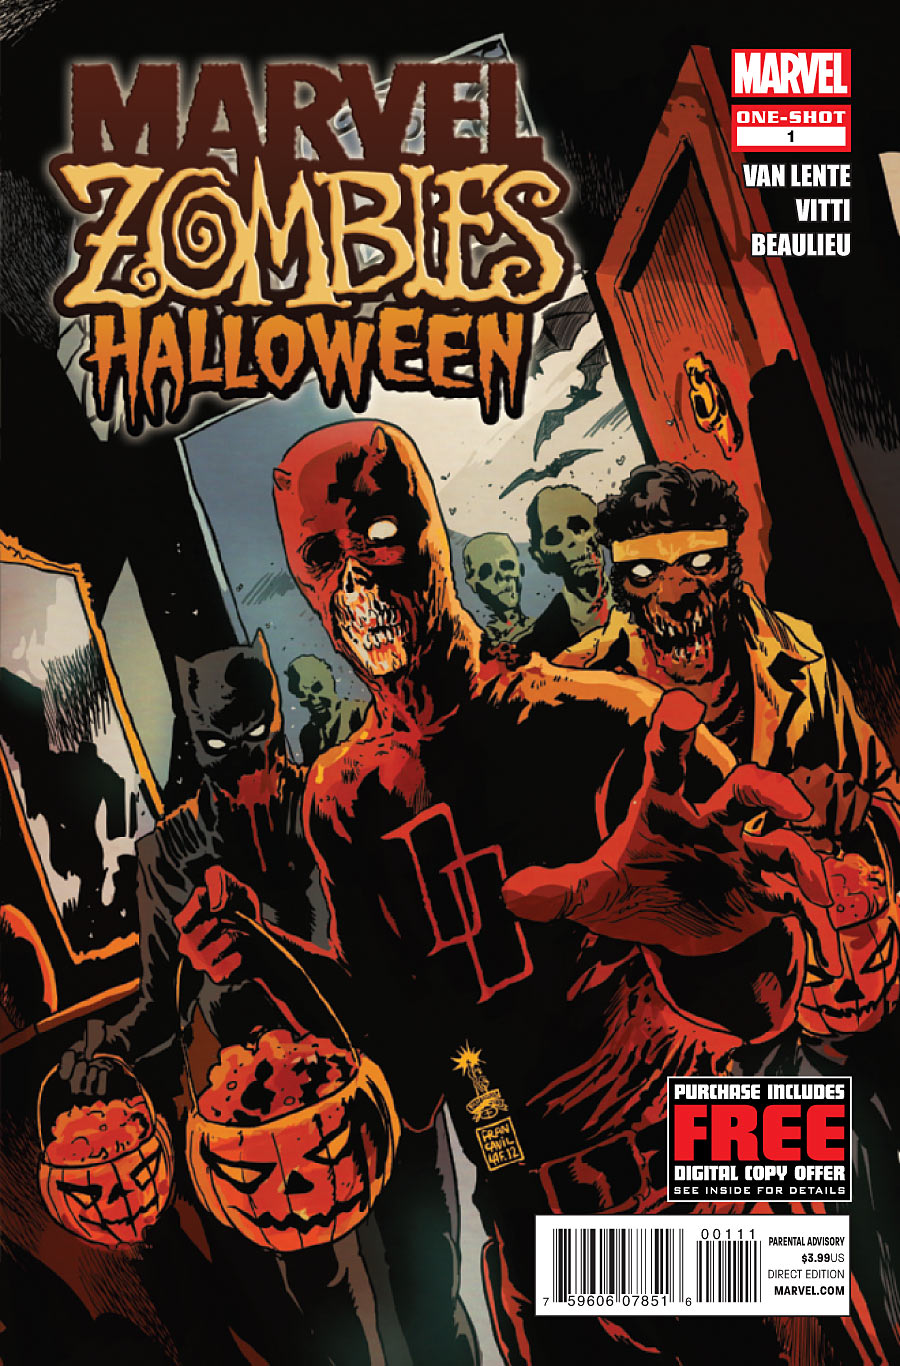 REVIEW Marvel Zombies Halloween Special MAJOR SPOILERS